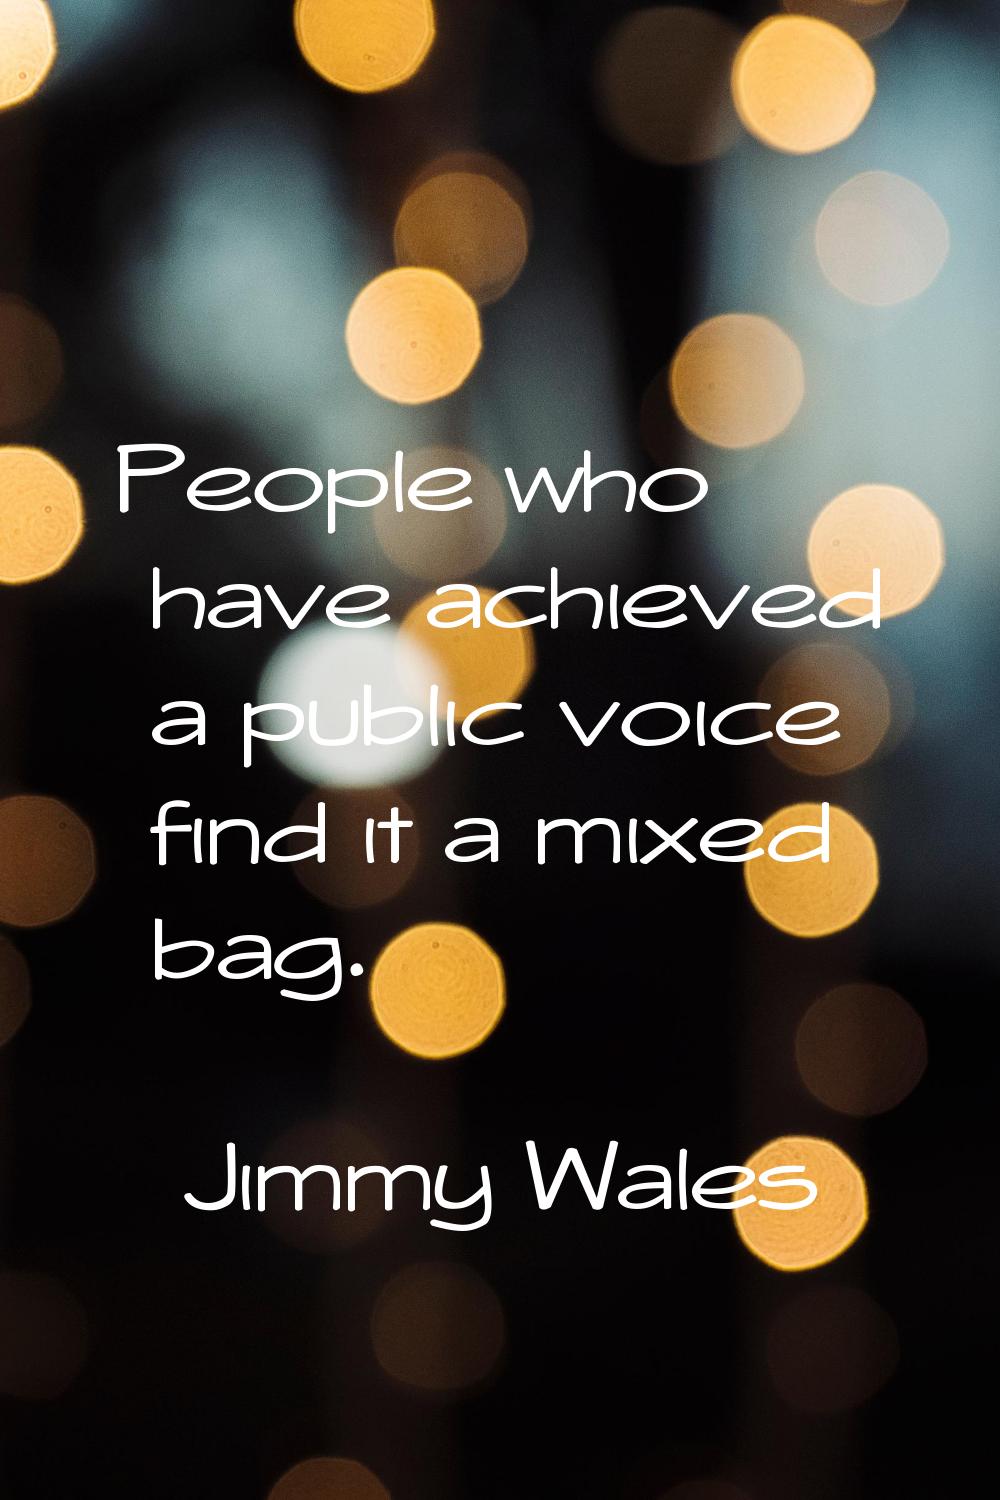 People who have achieved a public voice find it a mixed bag.